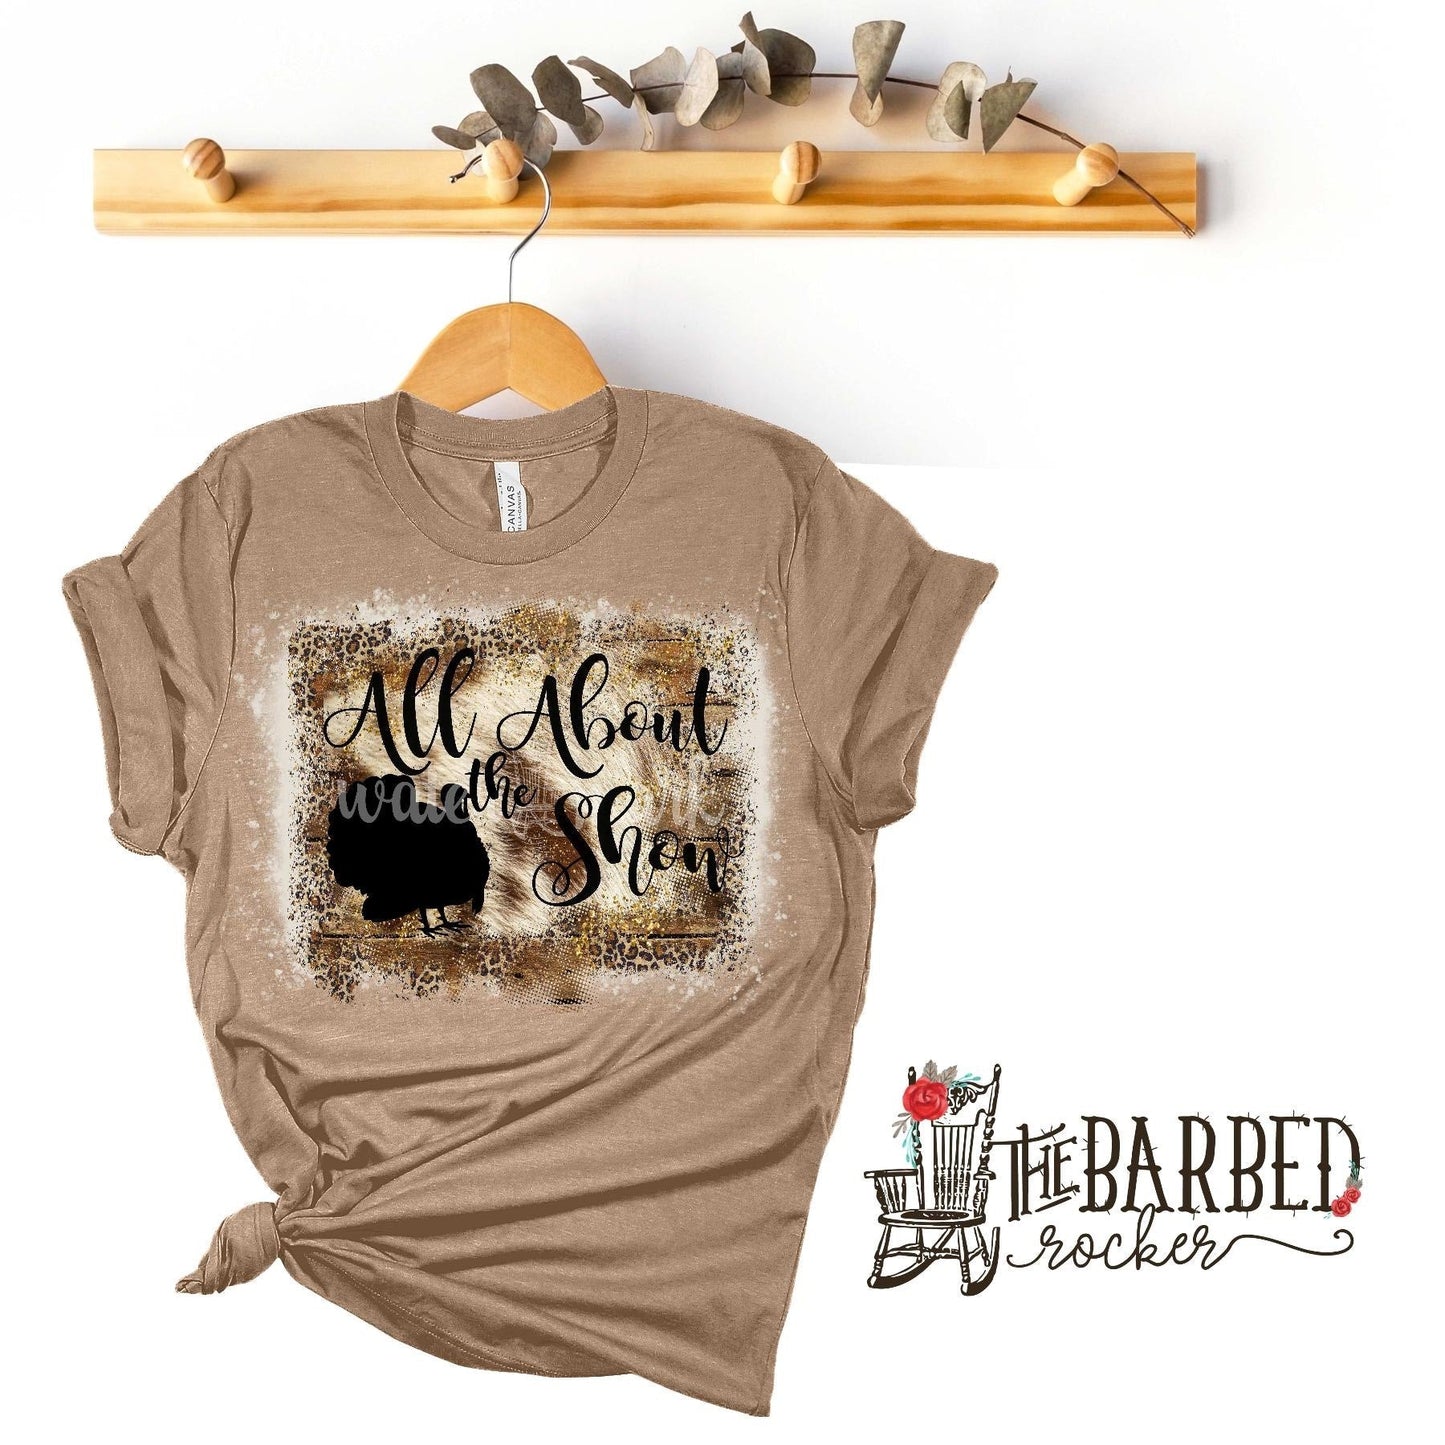 Bleached All About The Show Boar Goat T-Shirt